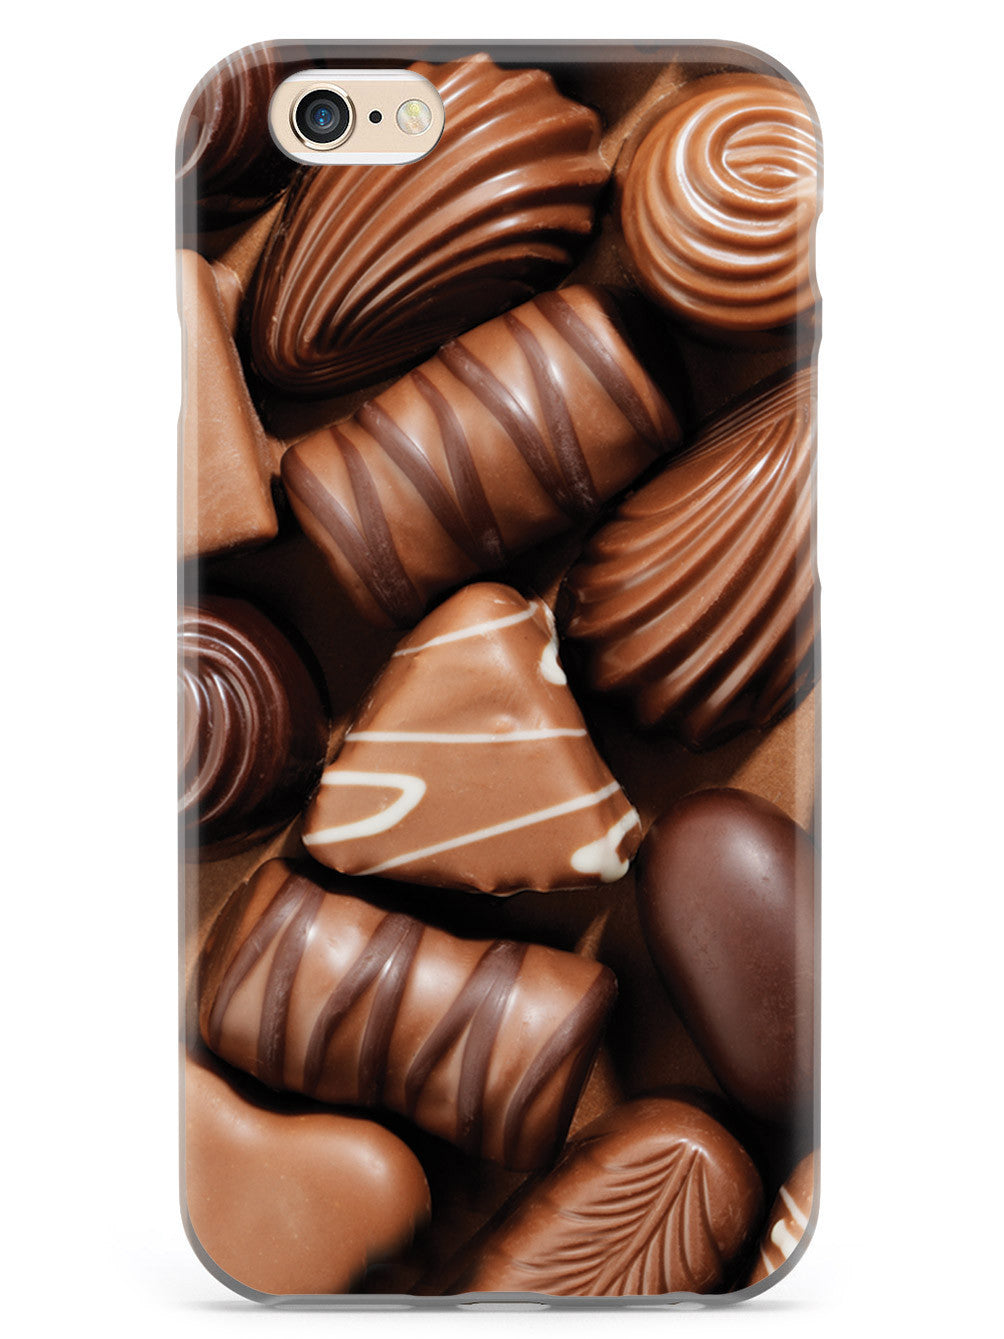 Assorted Chocolates - Chocolate Lover Case